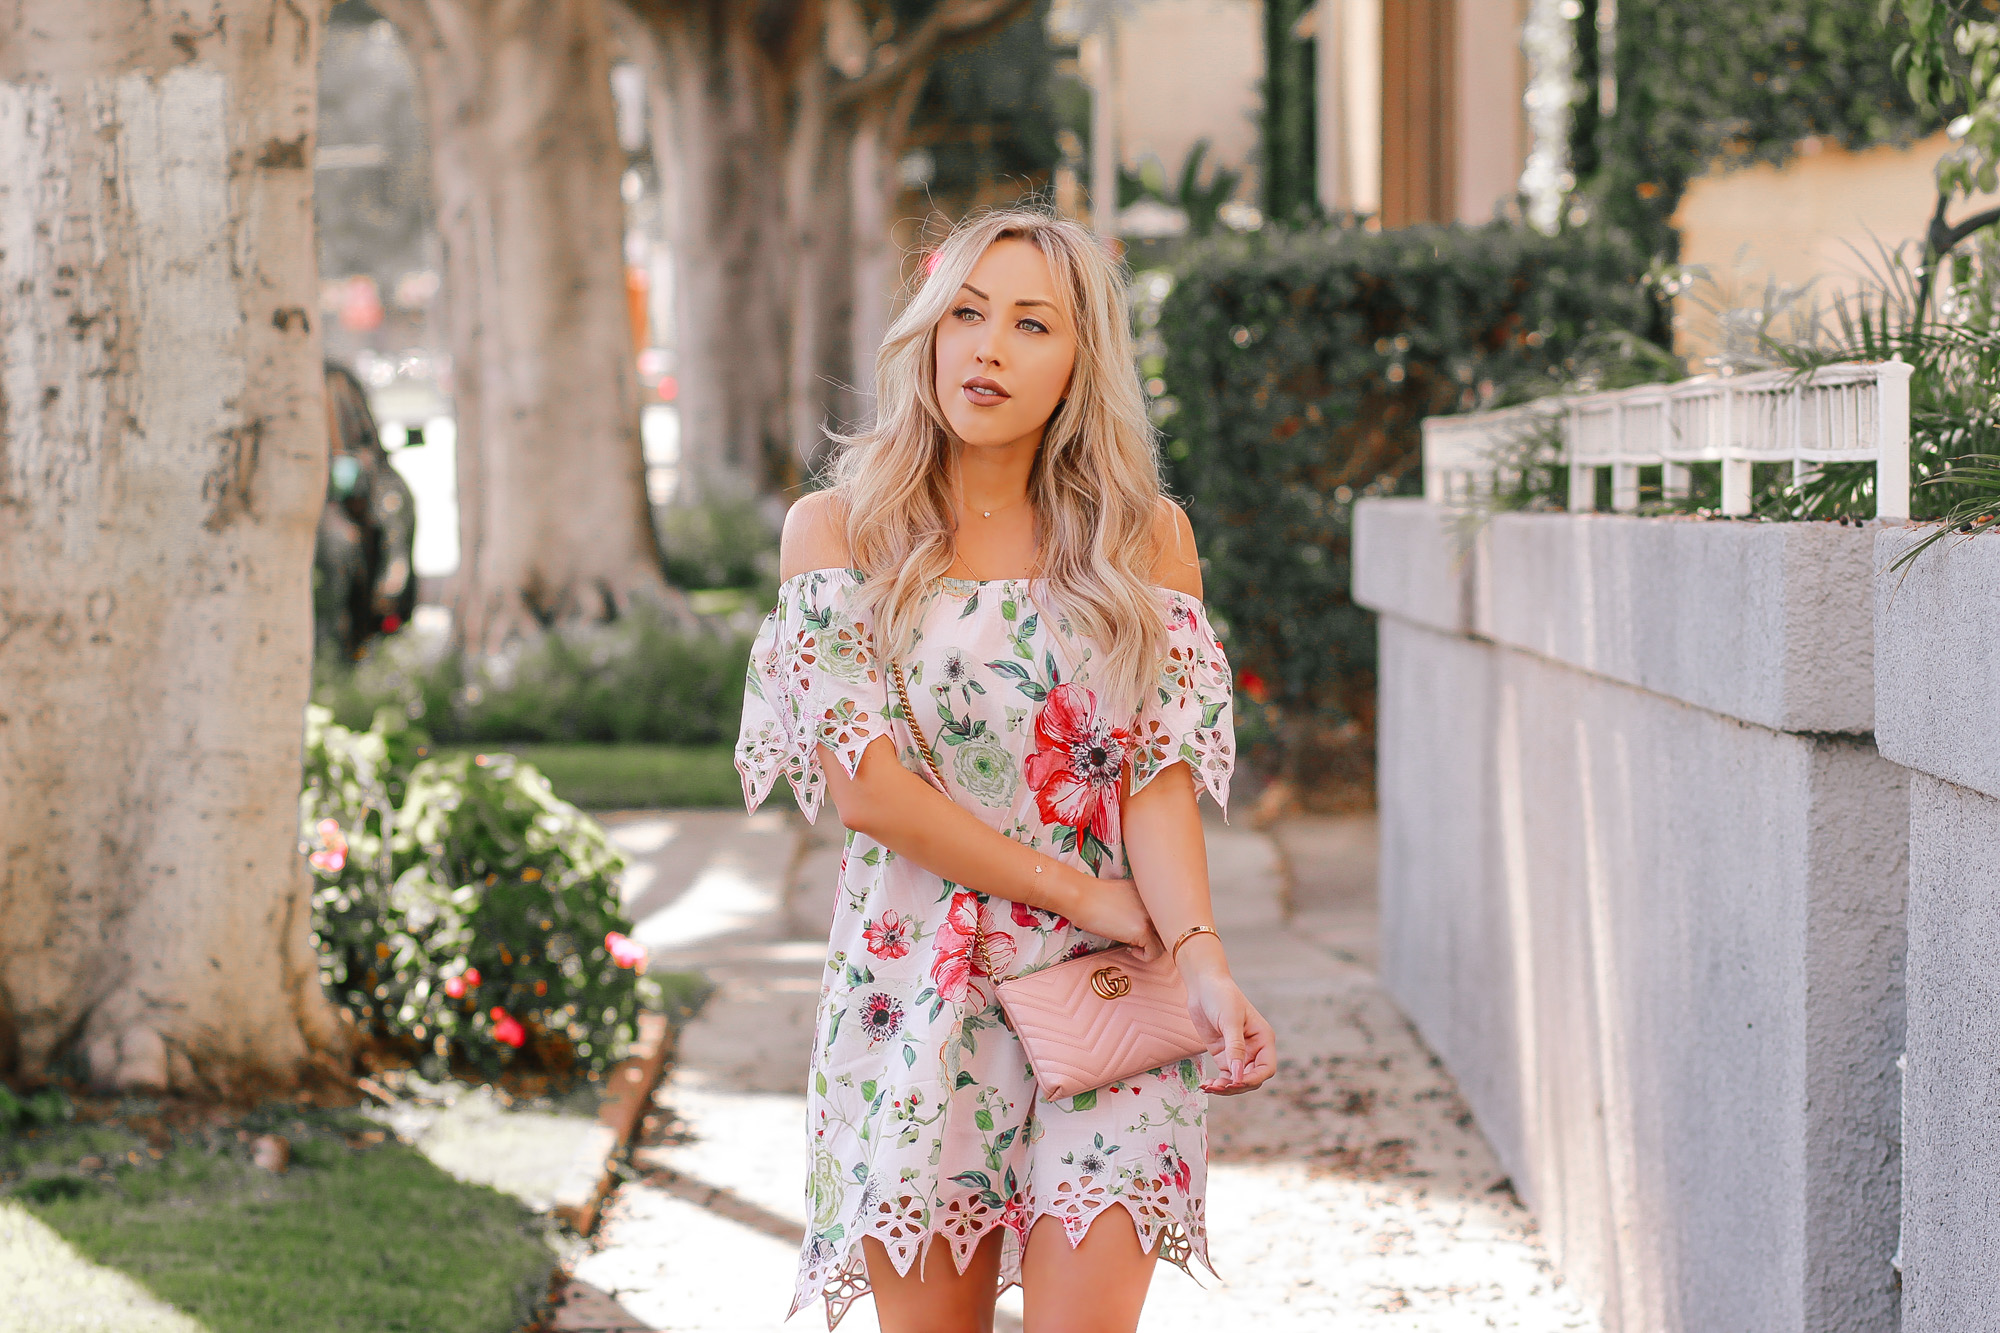 The Prettiest Spring Dress | Pink Floral Dress | Spring Fashion | Pink Gucci Bag | Blondie in the City by Hayley Larue